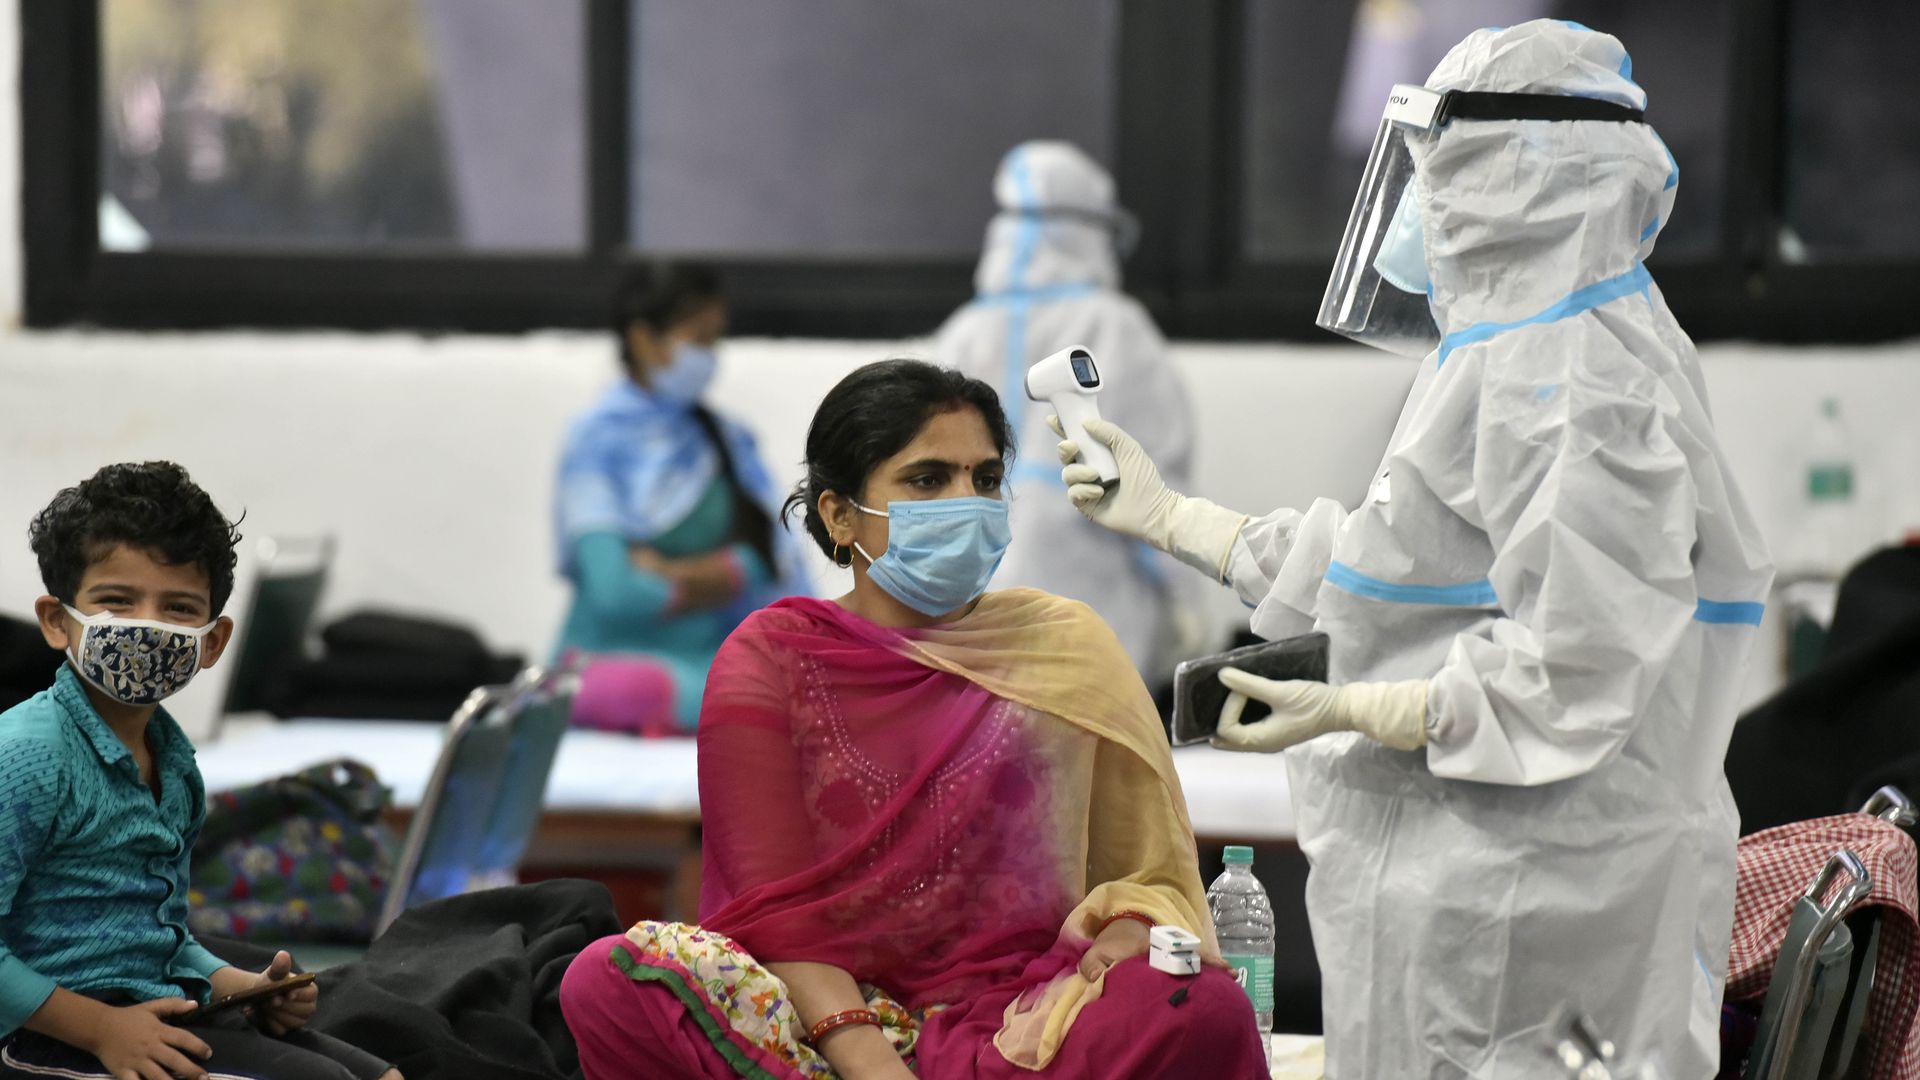 A health worker checks vitals of a coronavirus patient inside the Commonwealth Games (CWG) Village Covid Care Centre, on September 27, 2020 in New Delhi, India.